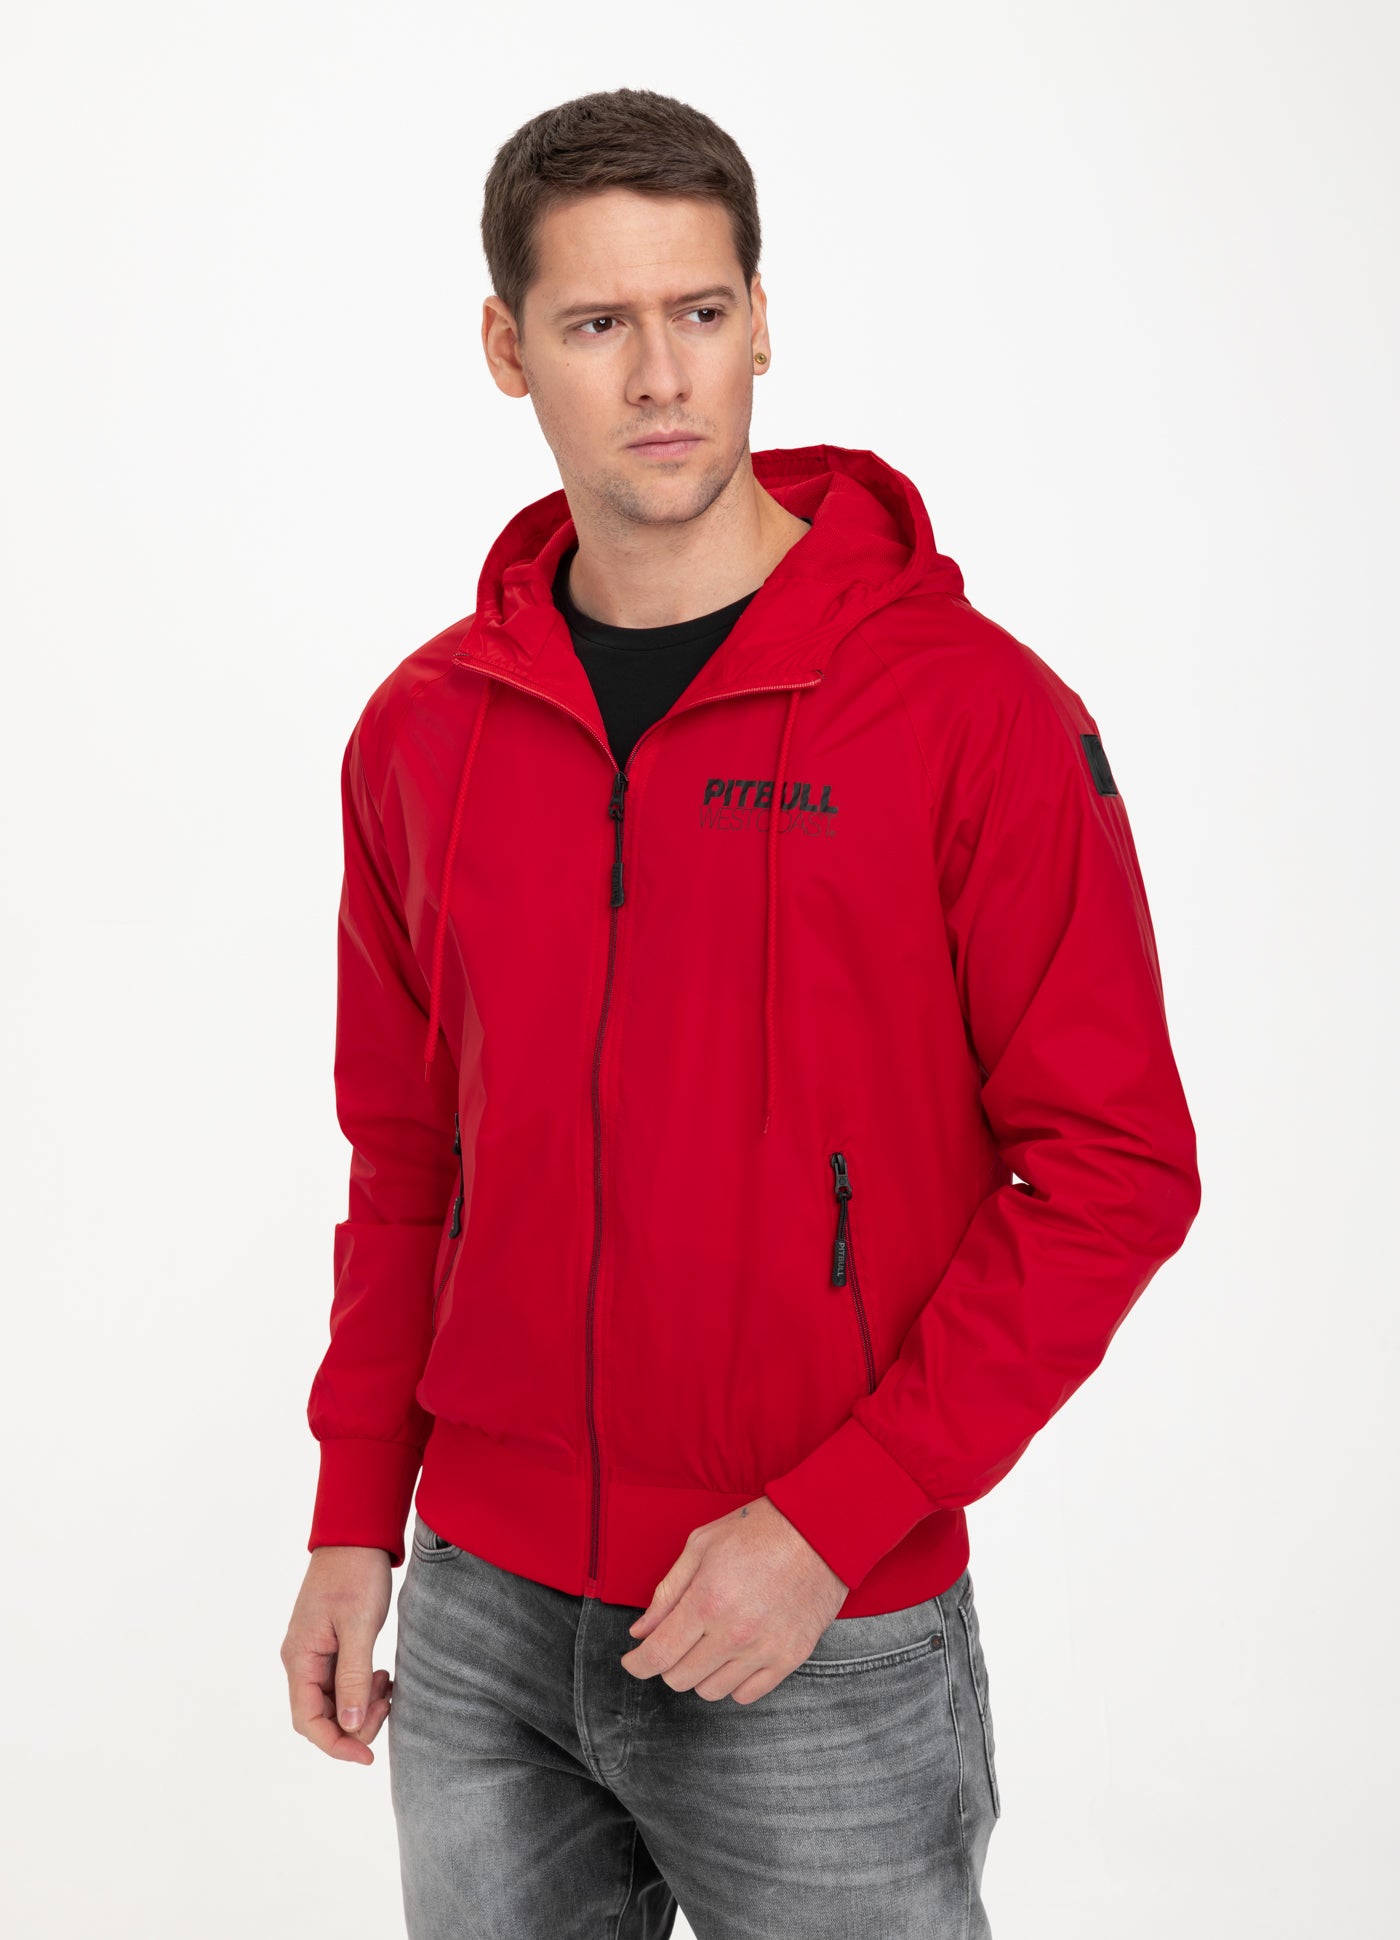 ATHLETIC Jacket Red 